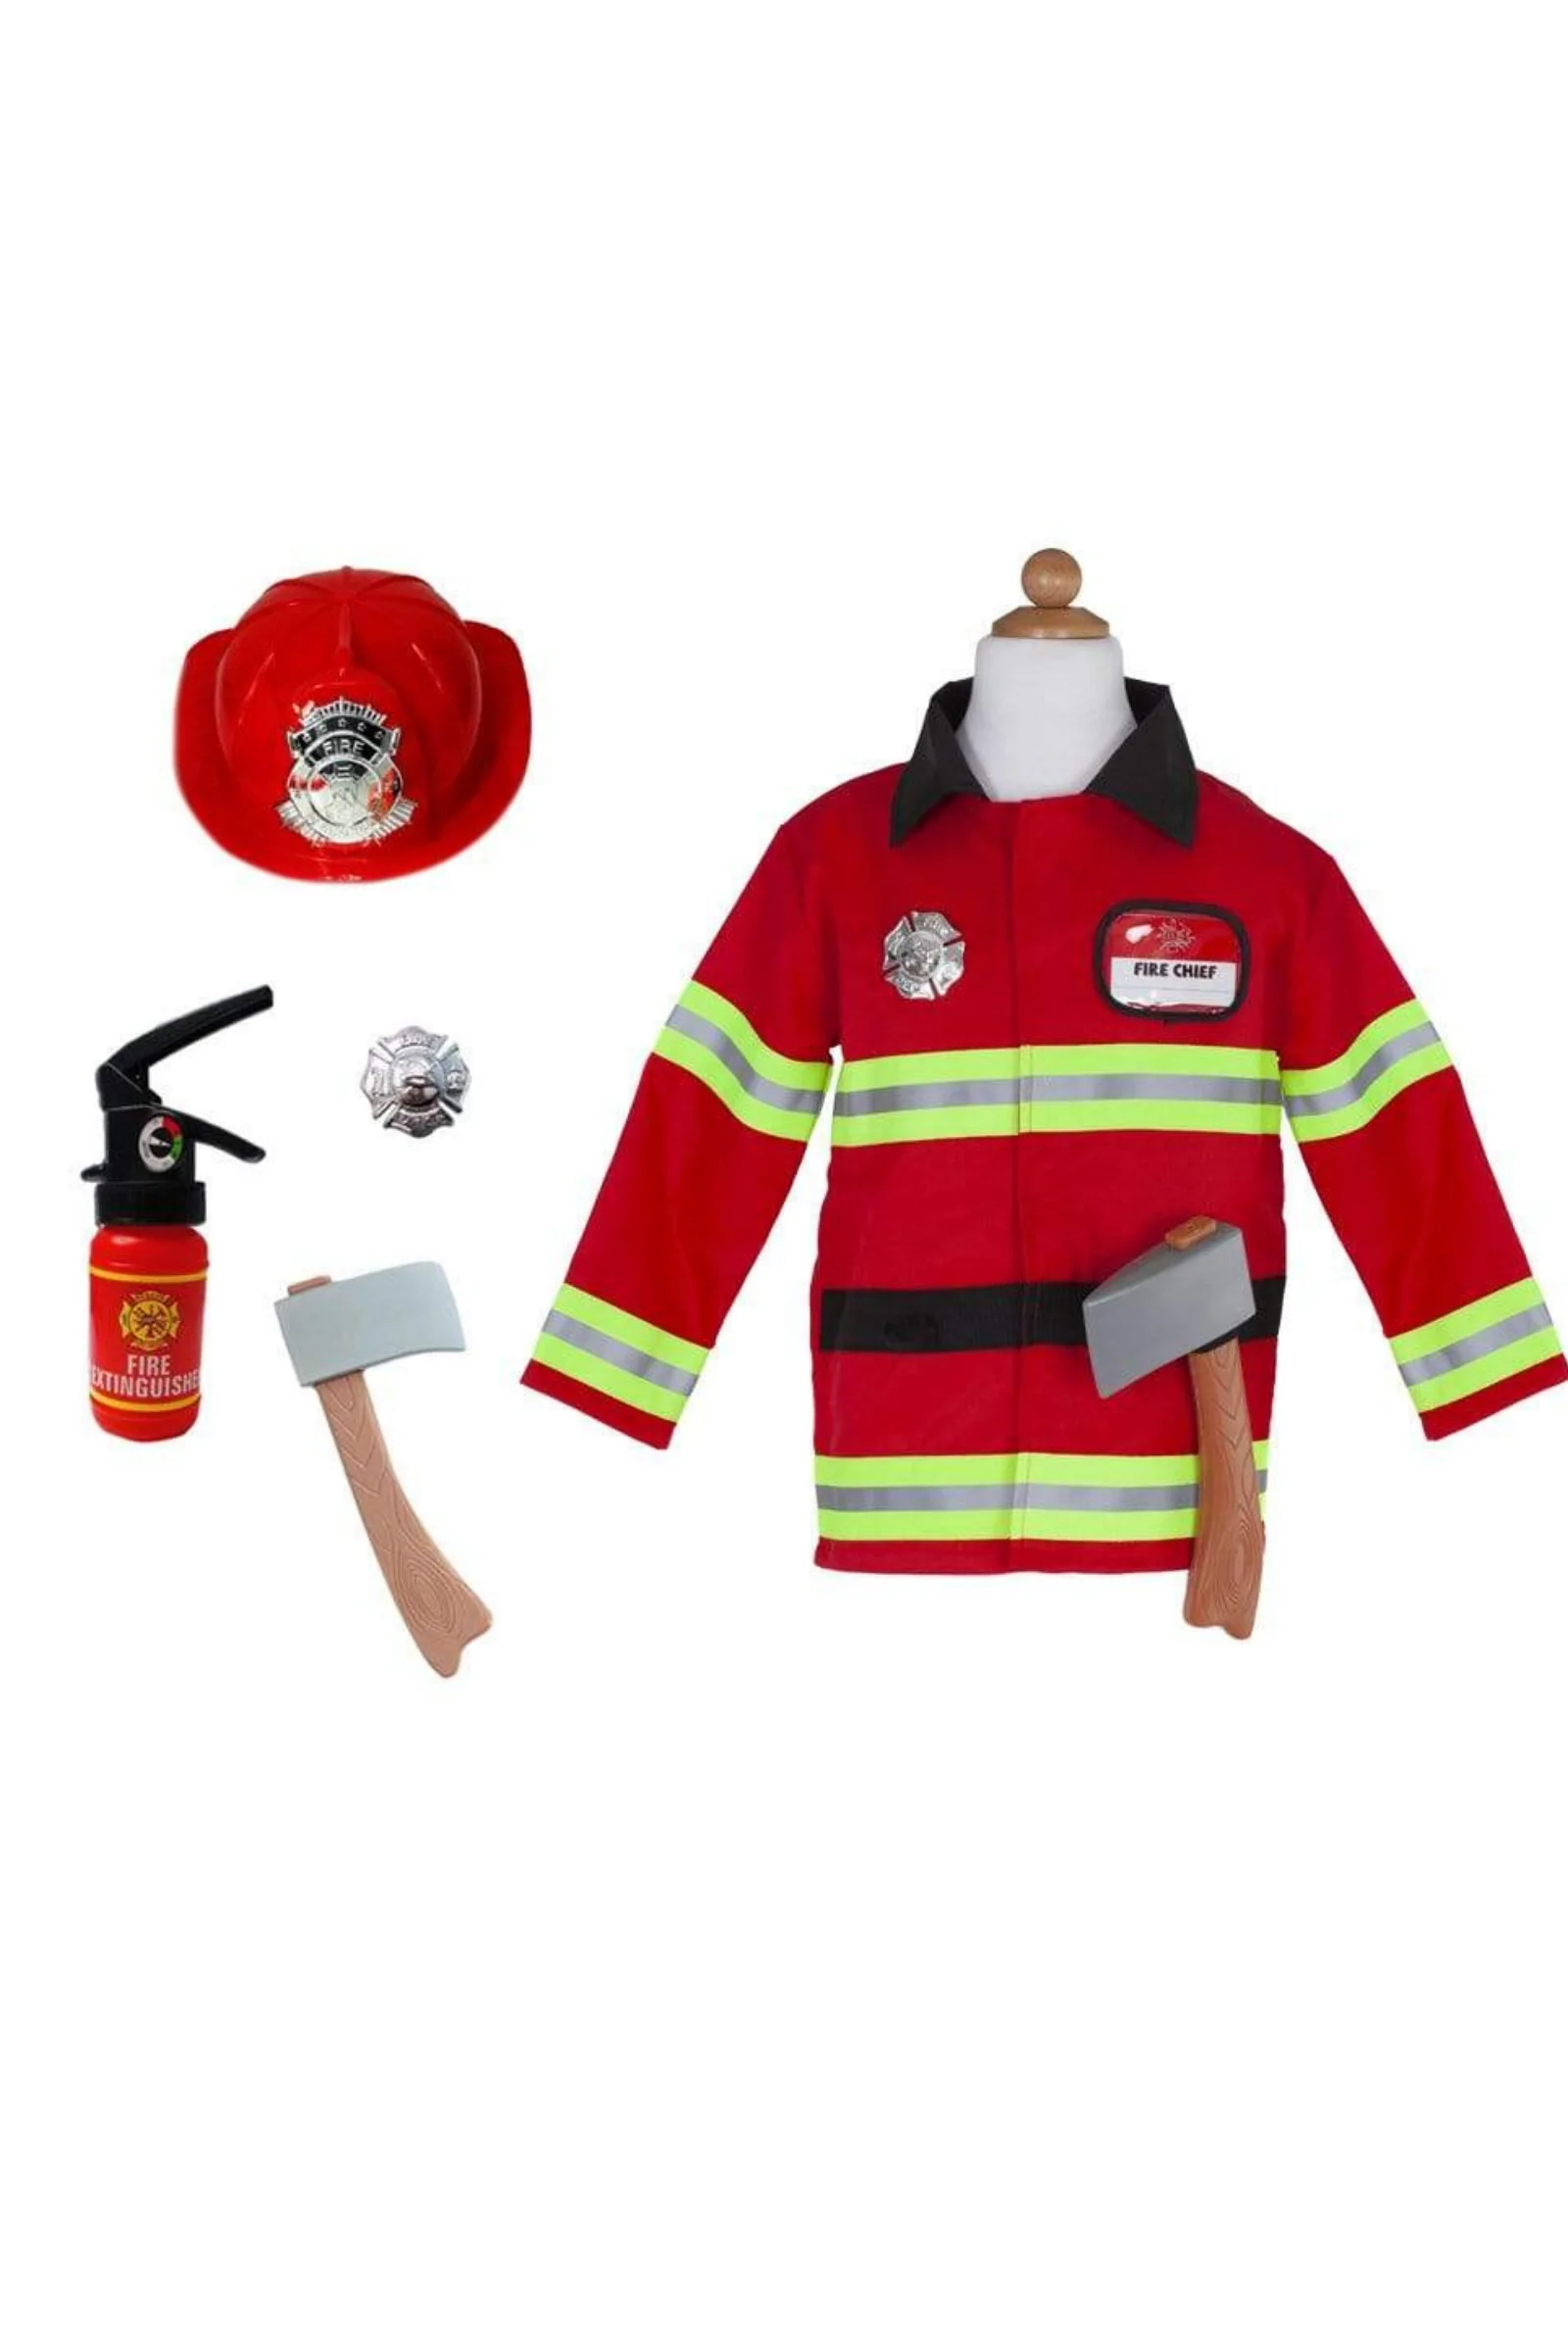 Firefighter 5  Size 3-4